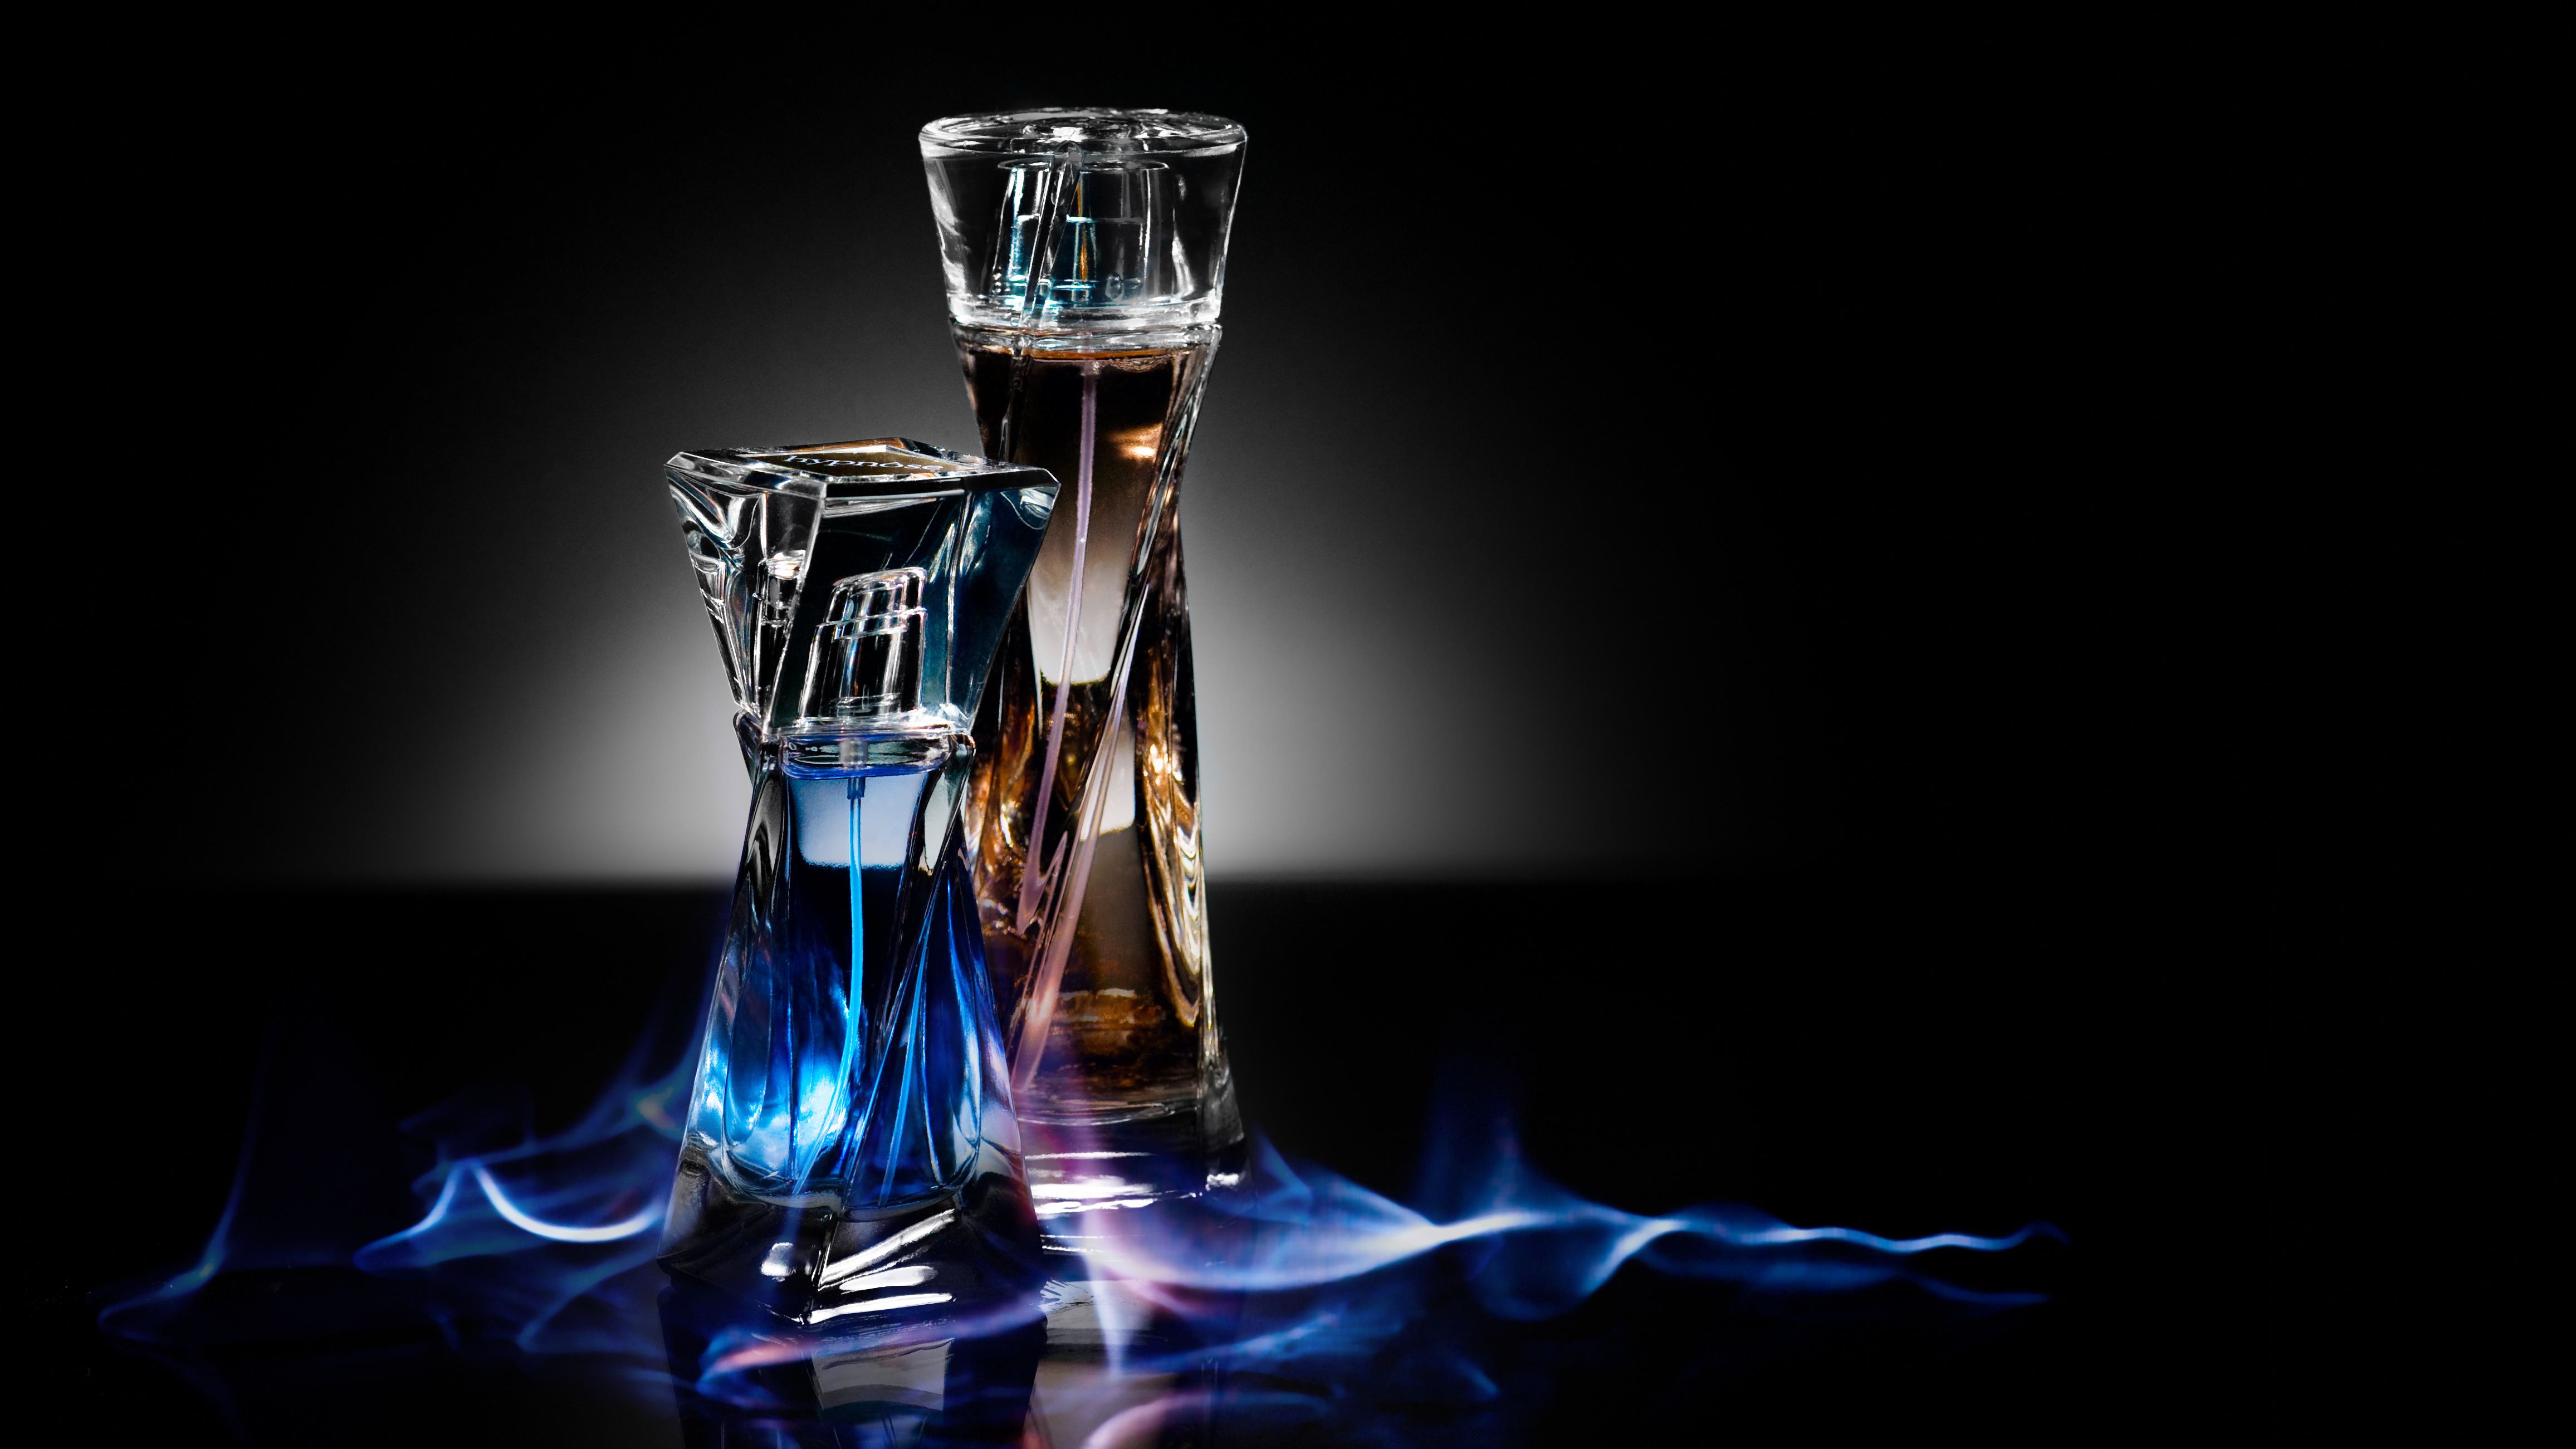 Free download Perfume Potion 4k Ultra HD Wallpaper Background Image [4625x2602] for your Desktop, Mobile & Tablet. Explore Potion Wallpaper. Potion Wallpaper